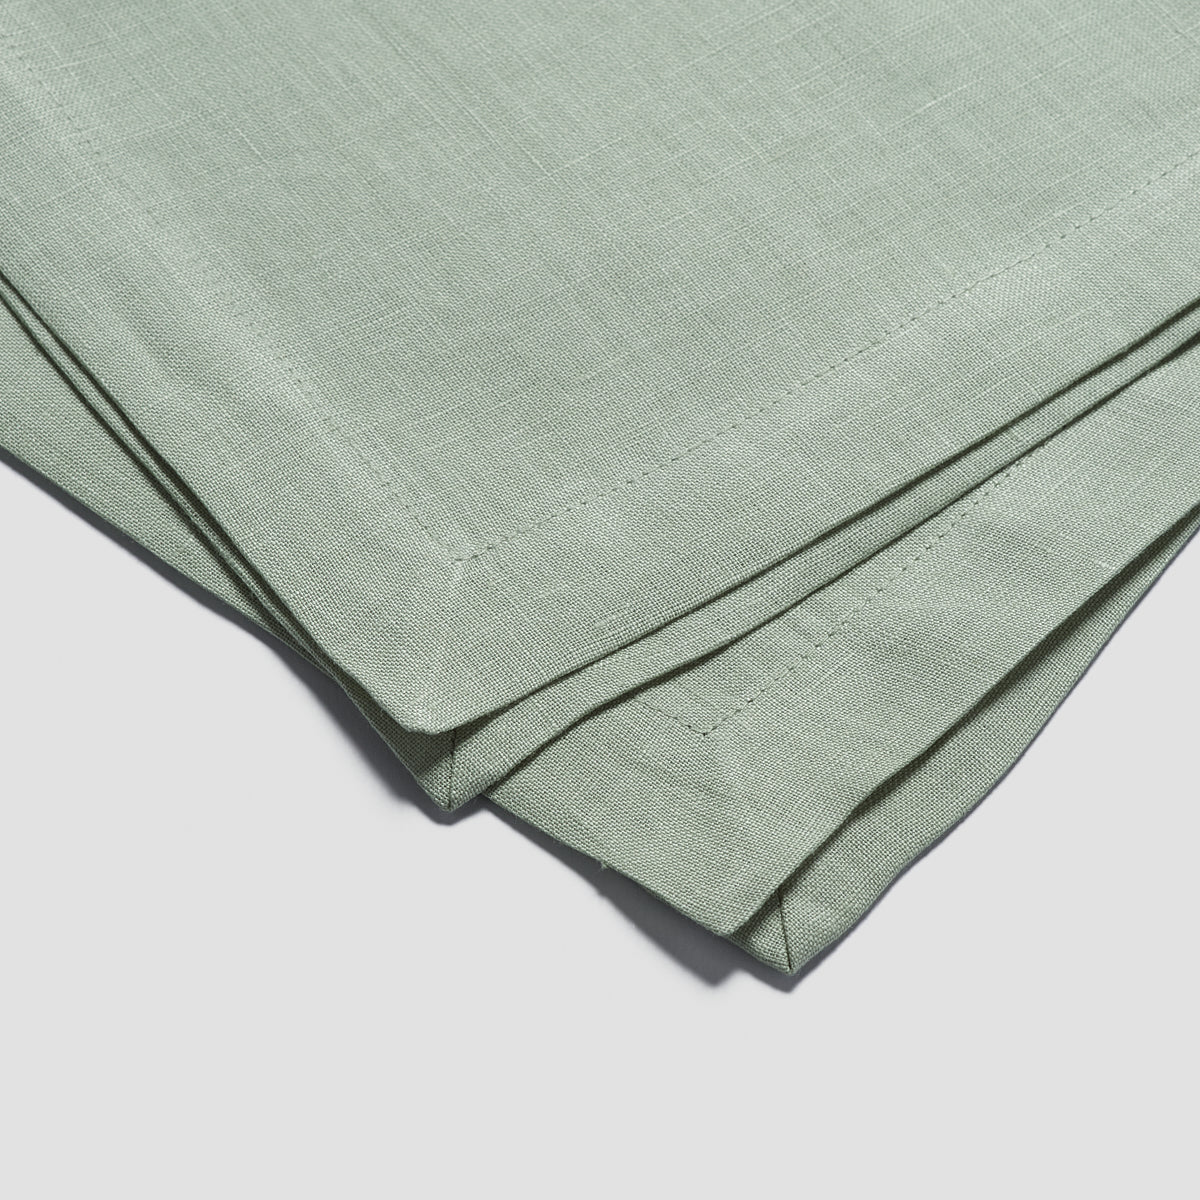 Sage Green Linen Napkins Set of 4 Size 45 x 45cm by Piglet in Bed